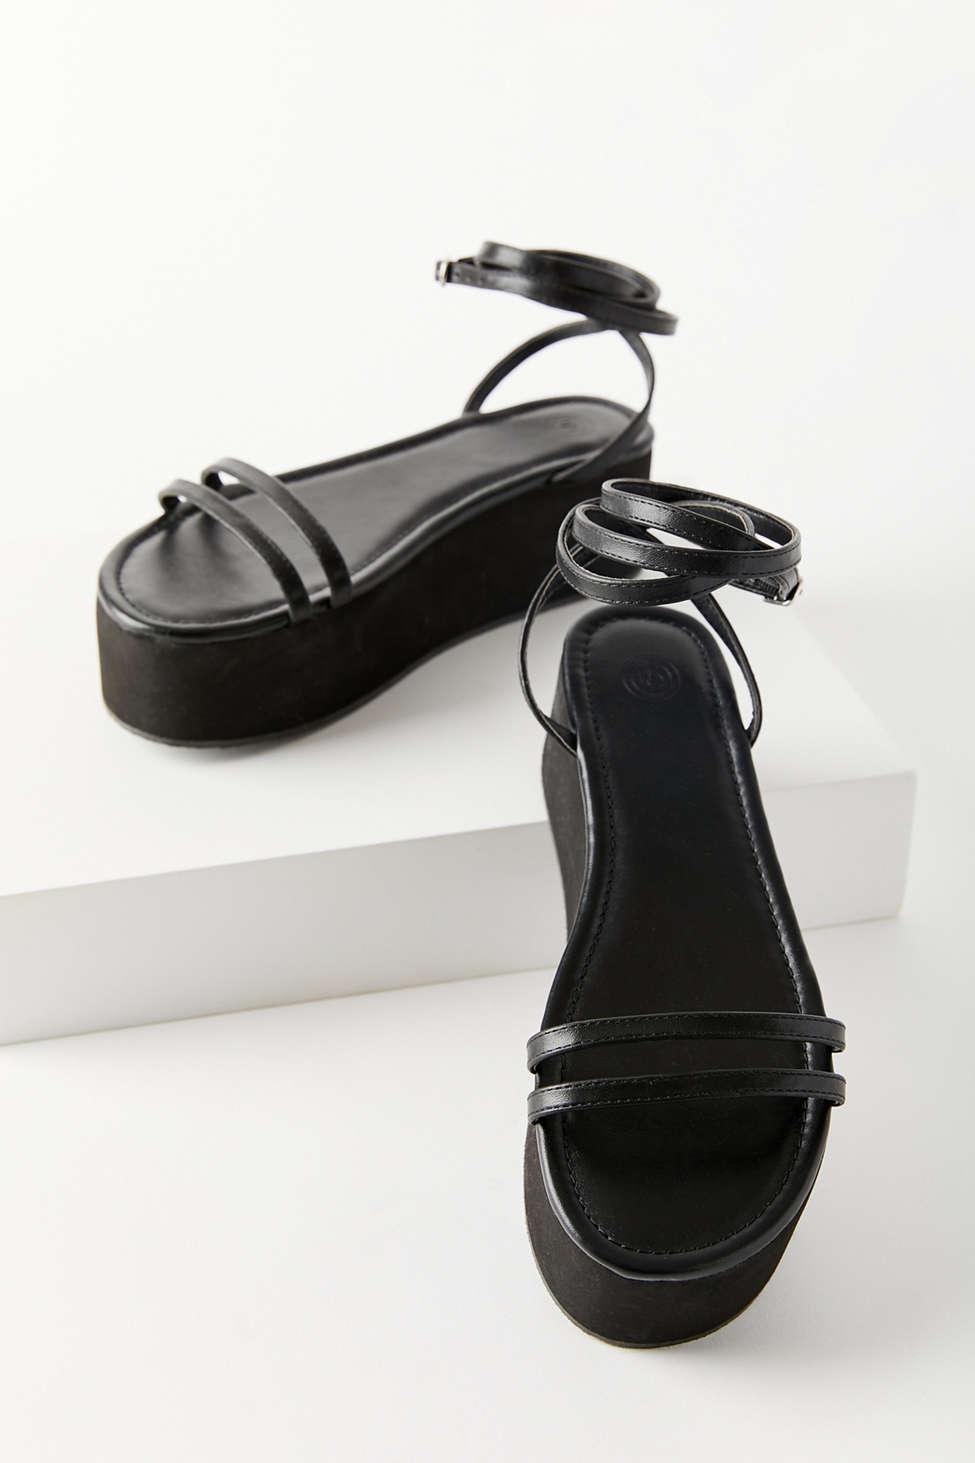 Urban Outfitters Uo Max Strappy Platform Sandal in Black - Lyst